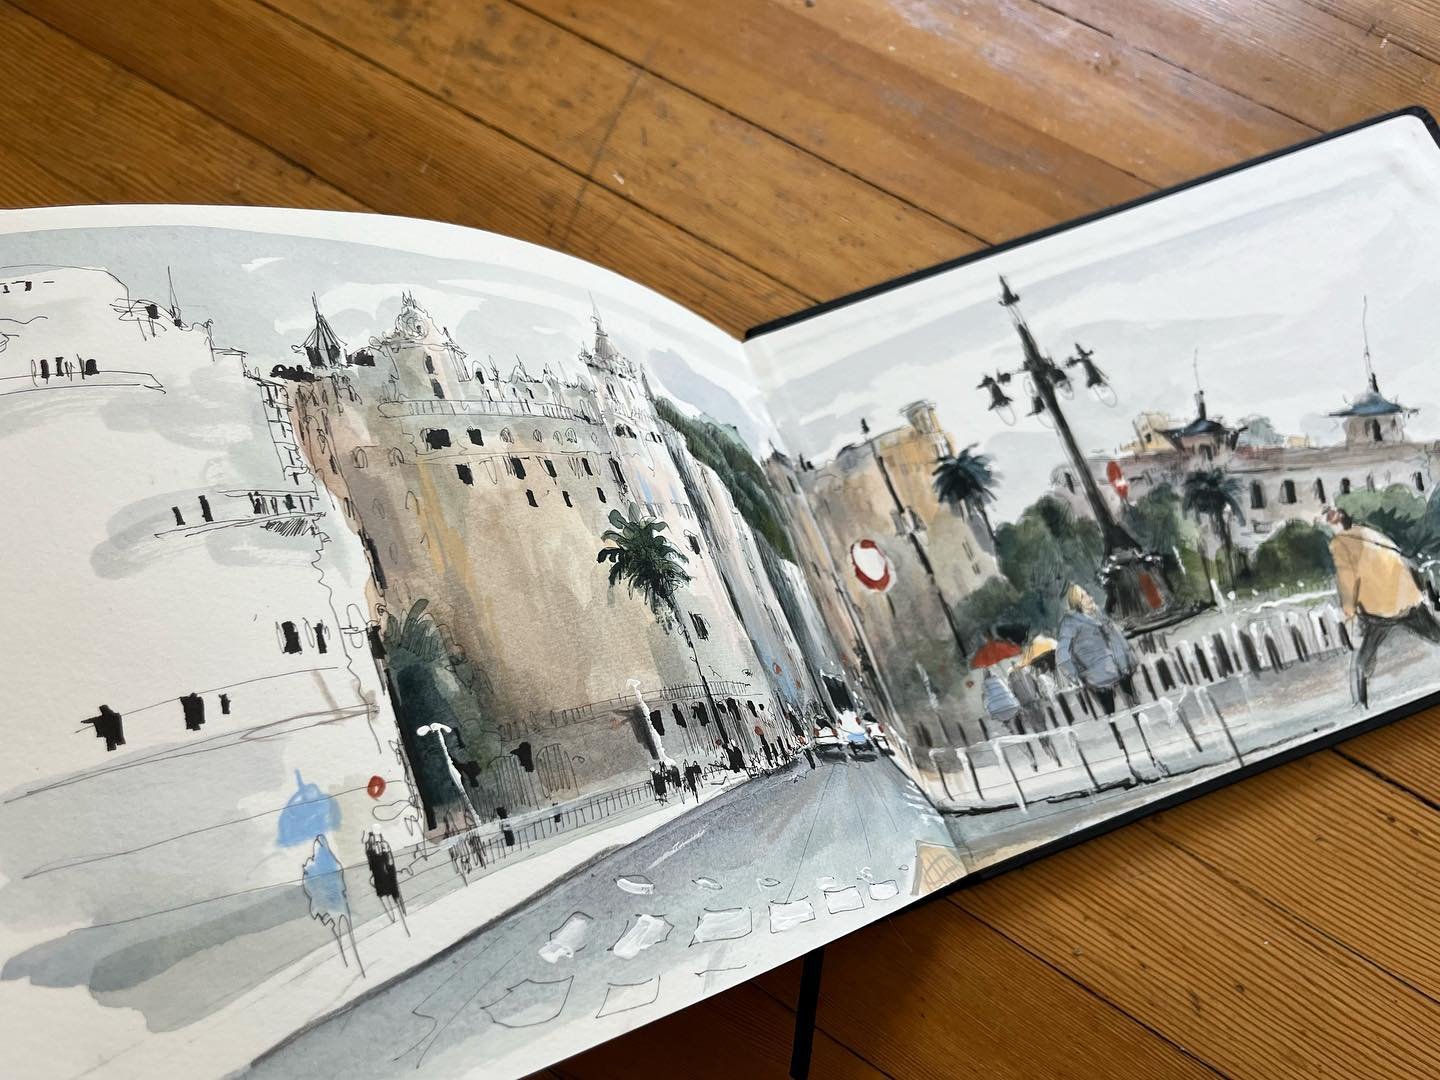 On my way to San Sebastian&rsquo;s bus station to go back home I had a little bit of time and saw one more scene that I wanted to capture. I was on my last page of the sketchbook, the page that attaches the inside of the book to the cover. I wasn&rsq